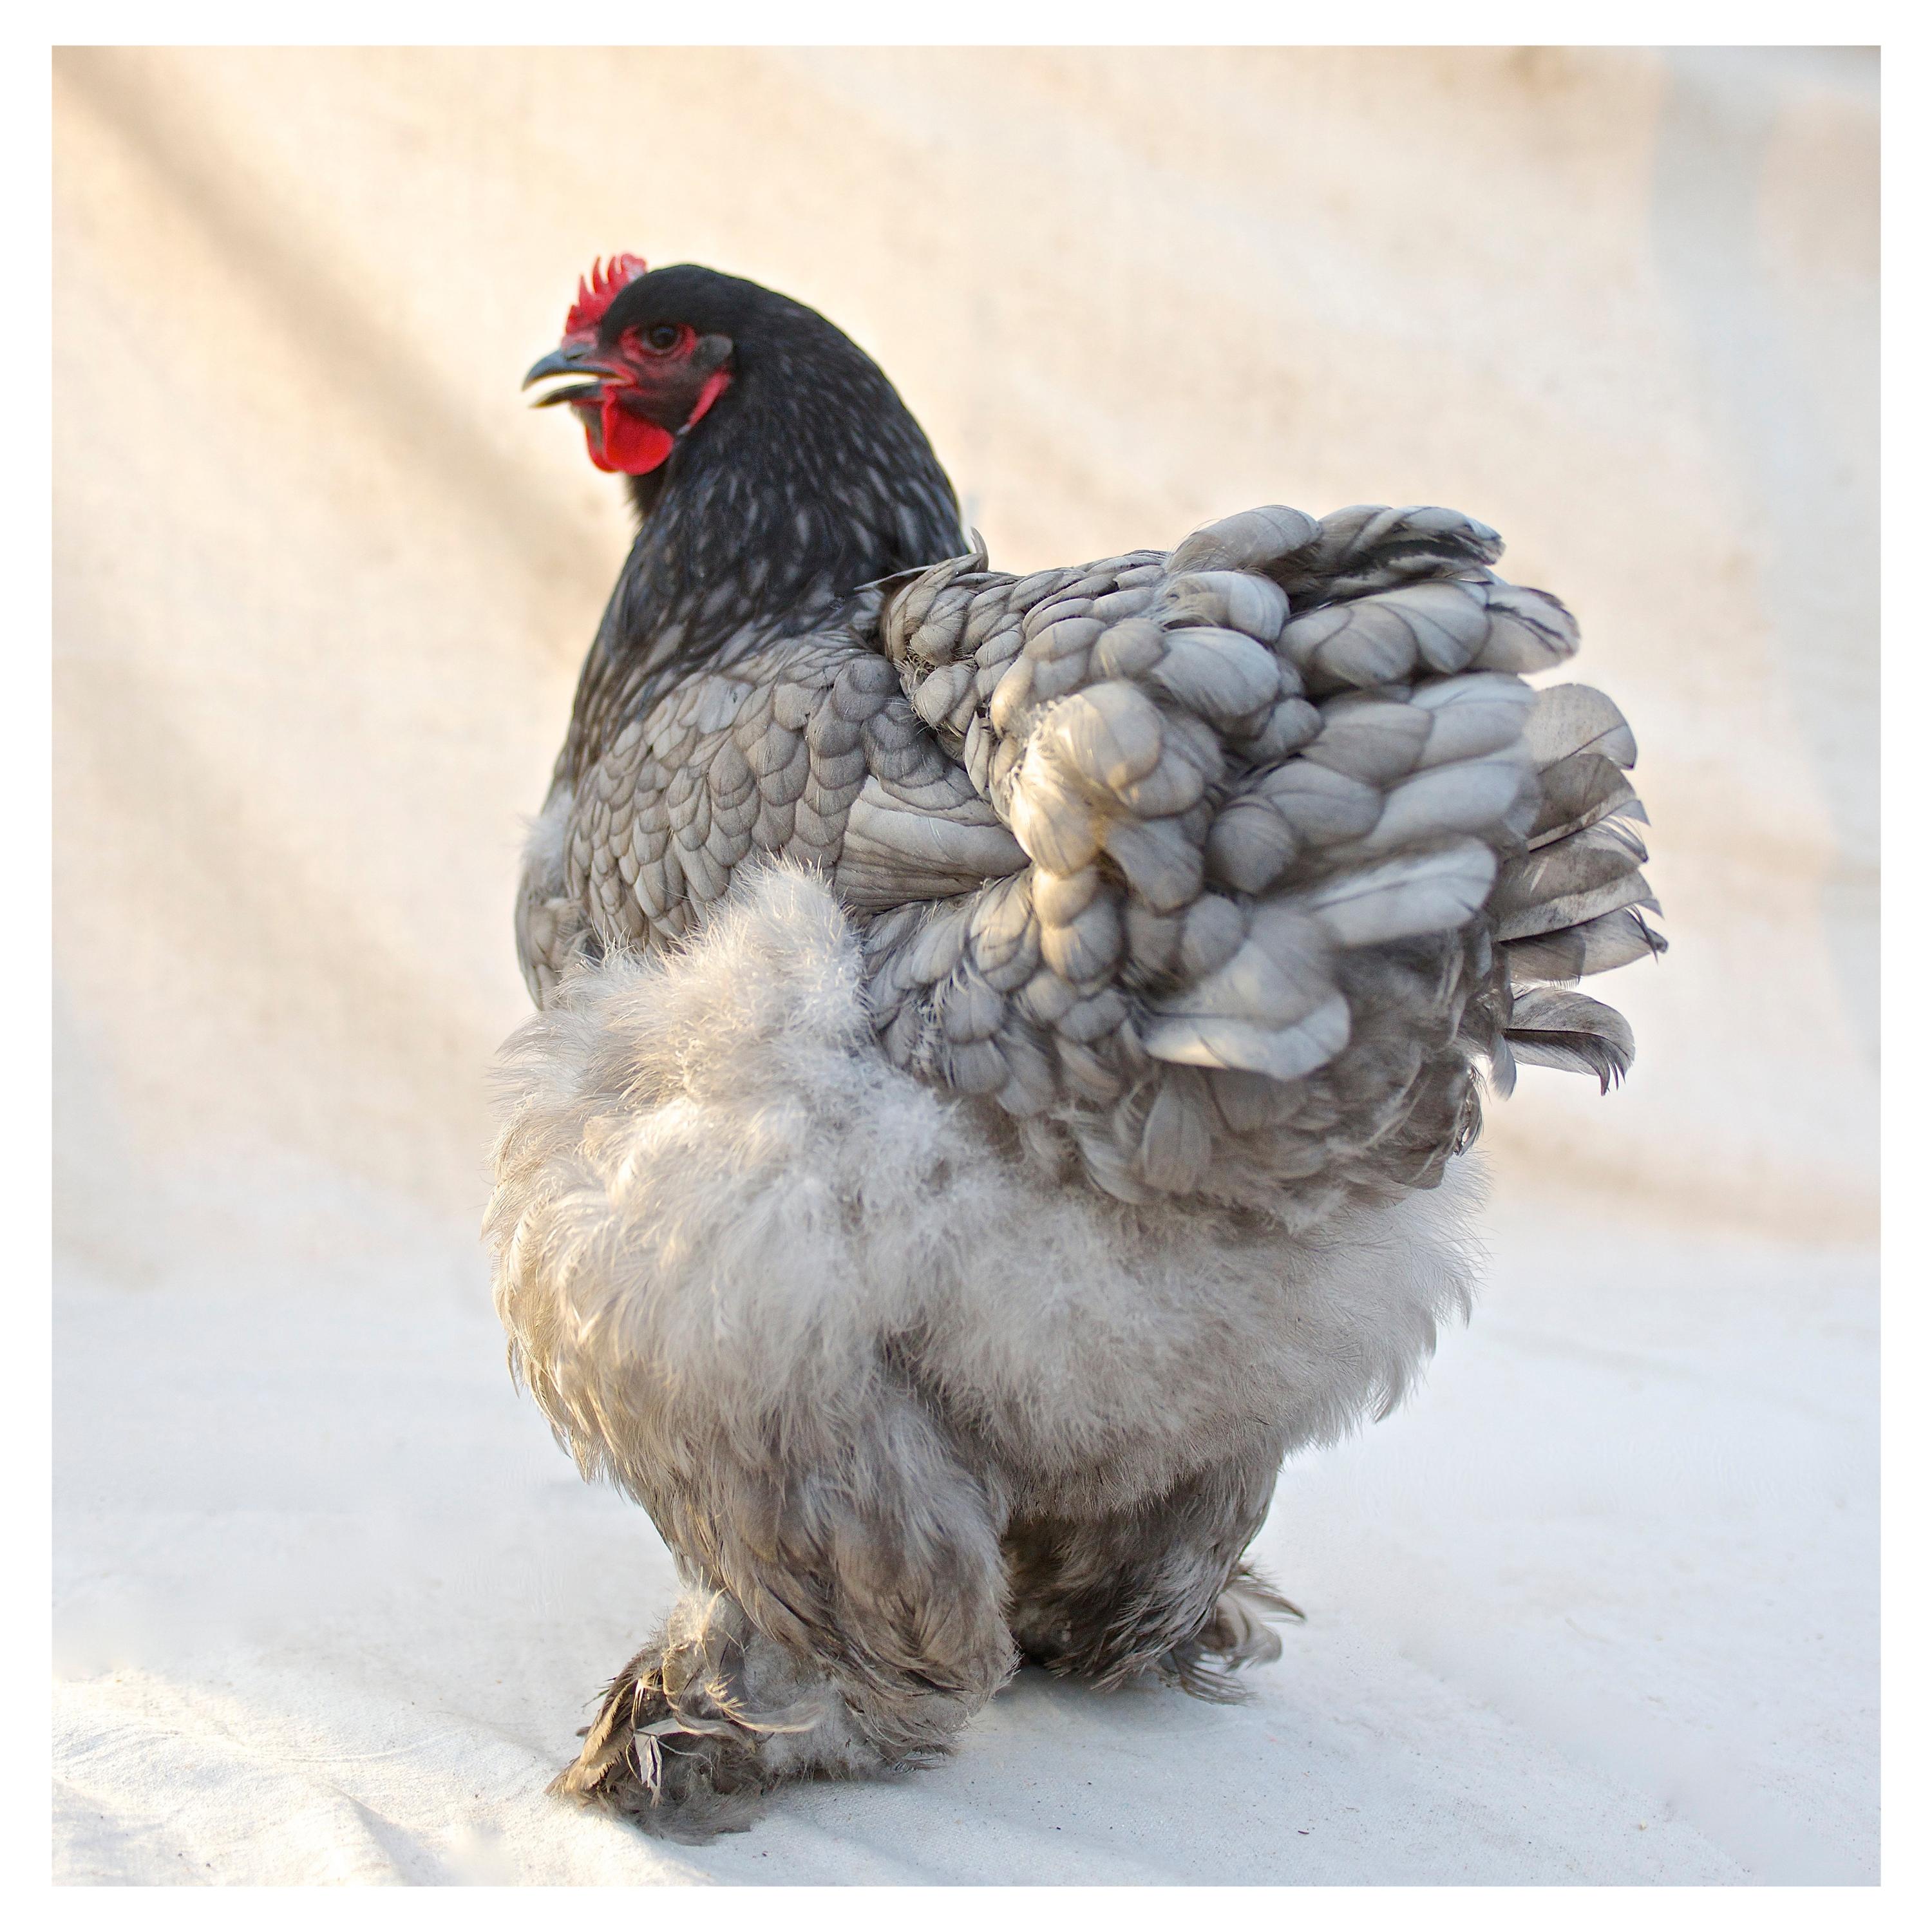 'Isabella Rossellini's Heritage Chickens Photographed by Patrice Casanova NY For Sale